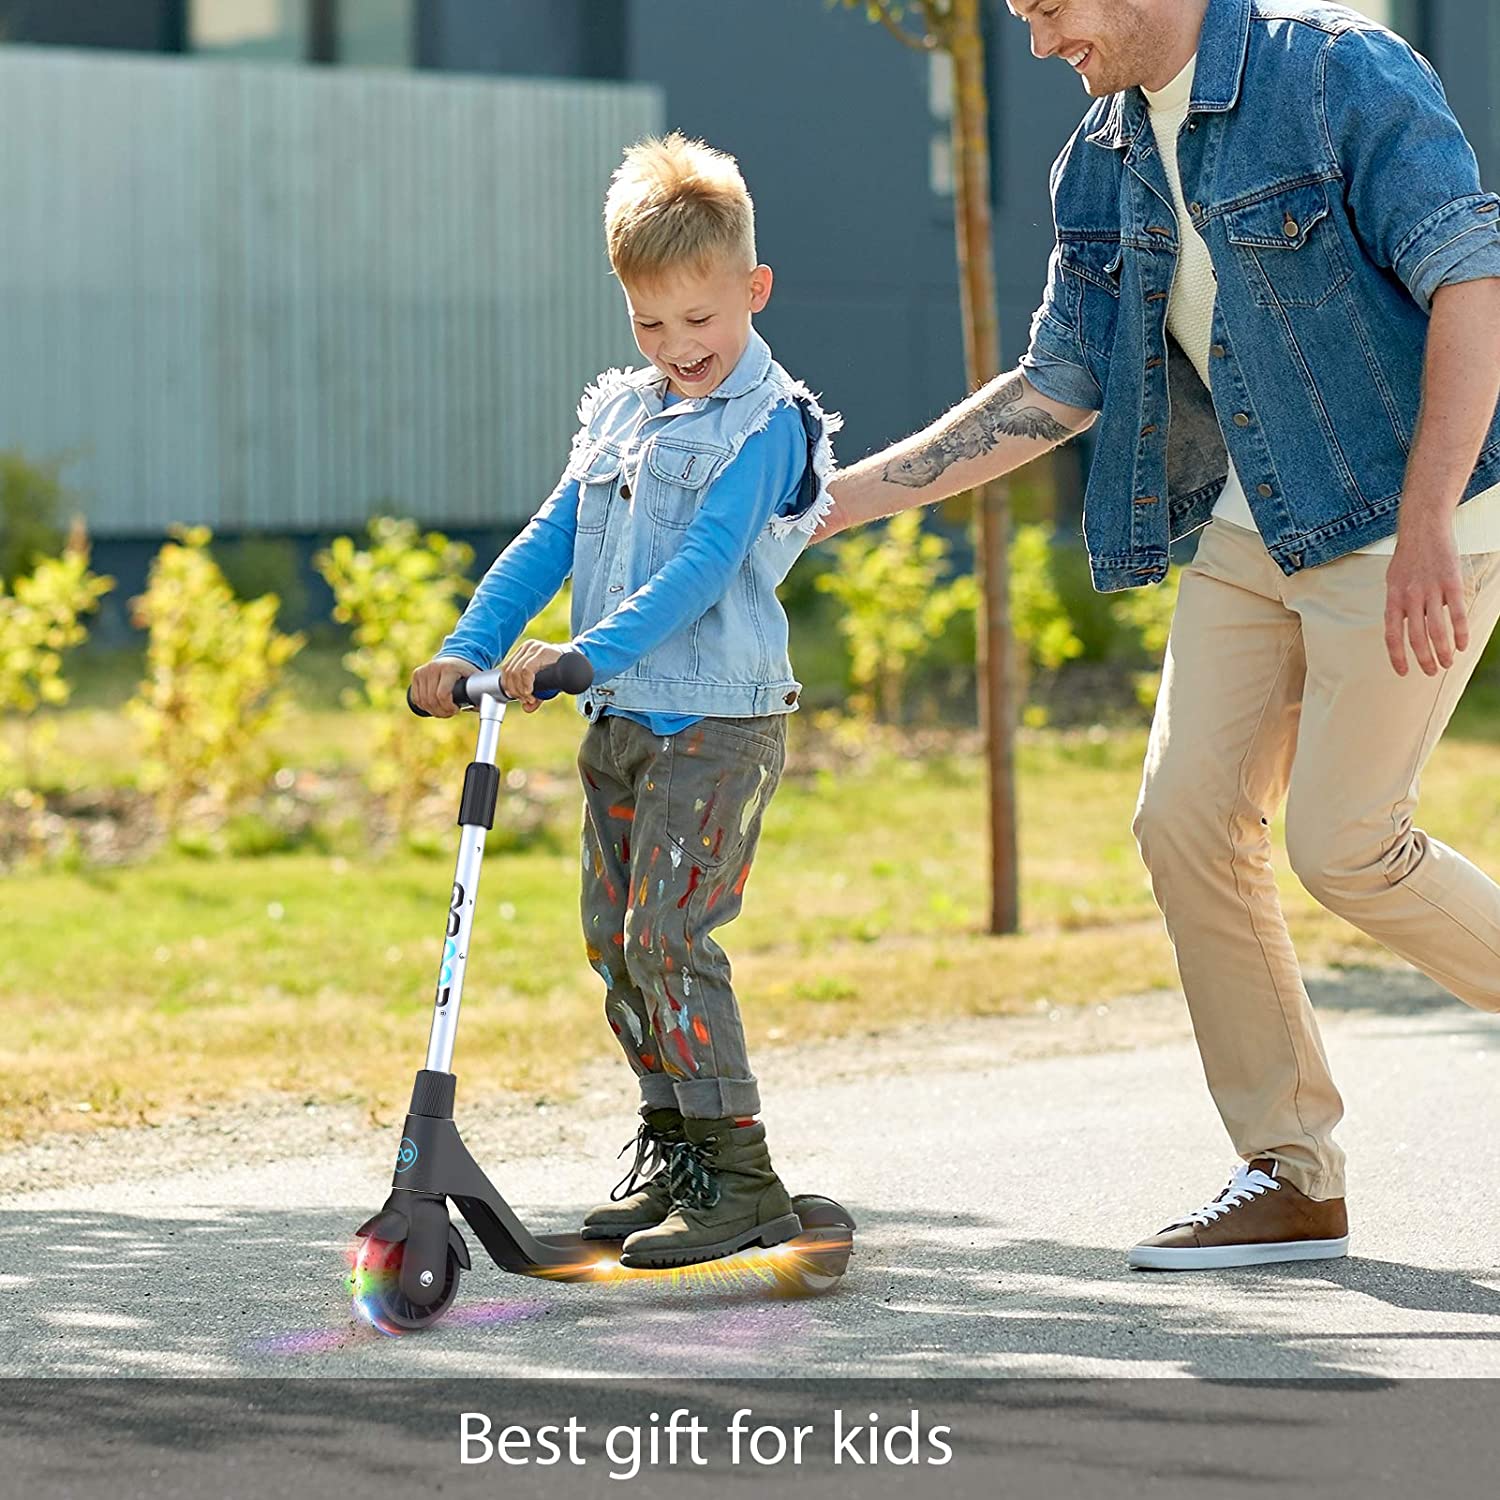 GYROOR Electric Scooter for Kids, Teens, Boys and Girls with Lightweight and Adjustable Handlebar, H30 Kids Electric Scooter with Rechargeable Battery, 6 MPH Limit-Best Gift for Kids! - image 5 of 10